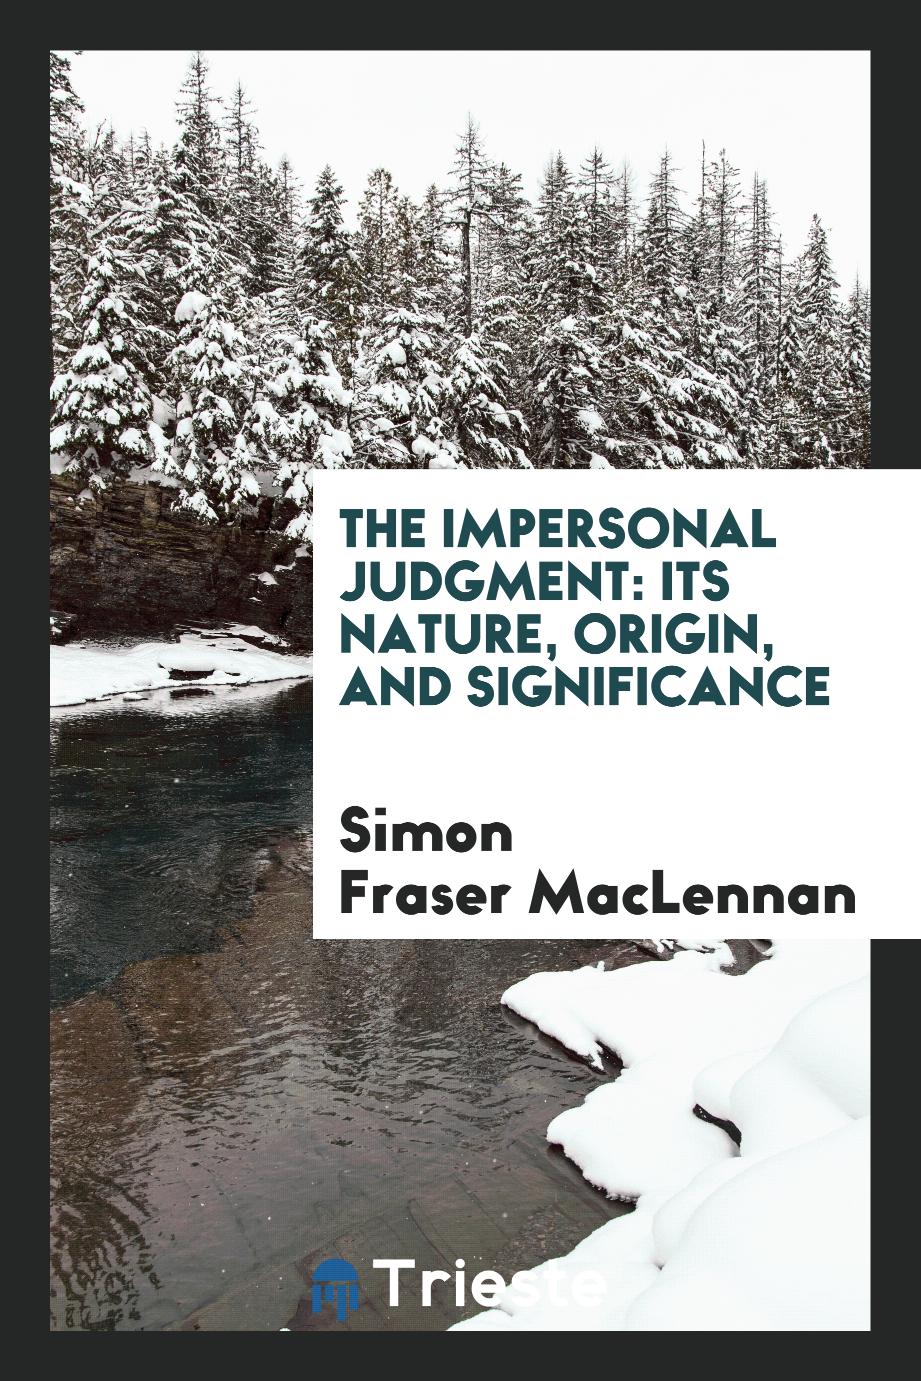 The Impersonal Judgment: Its Nature, Origin, and Significance